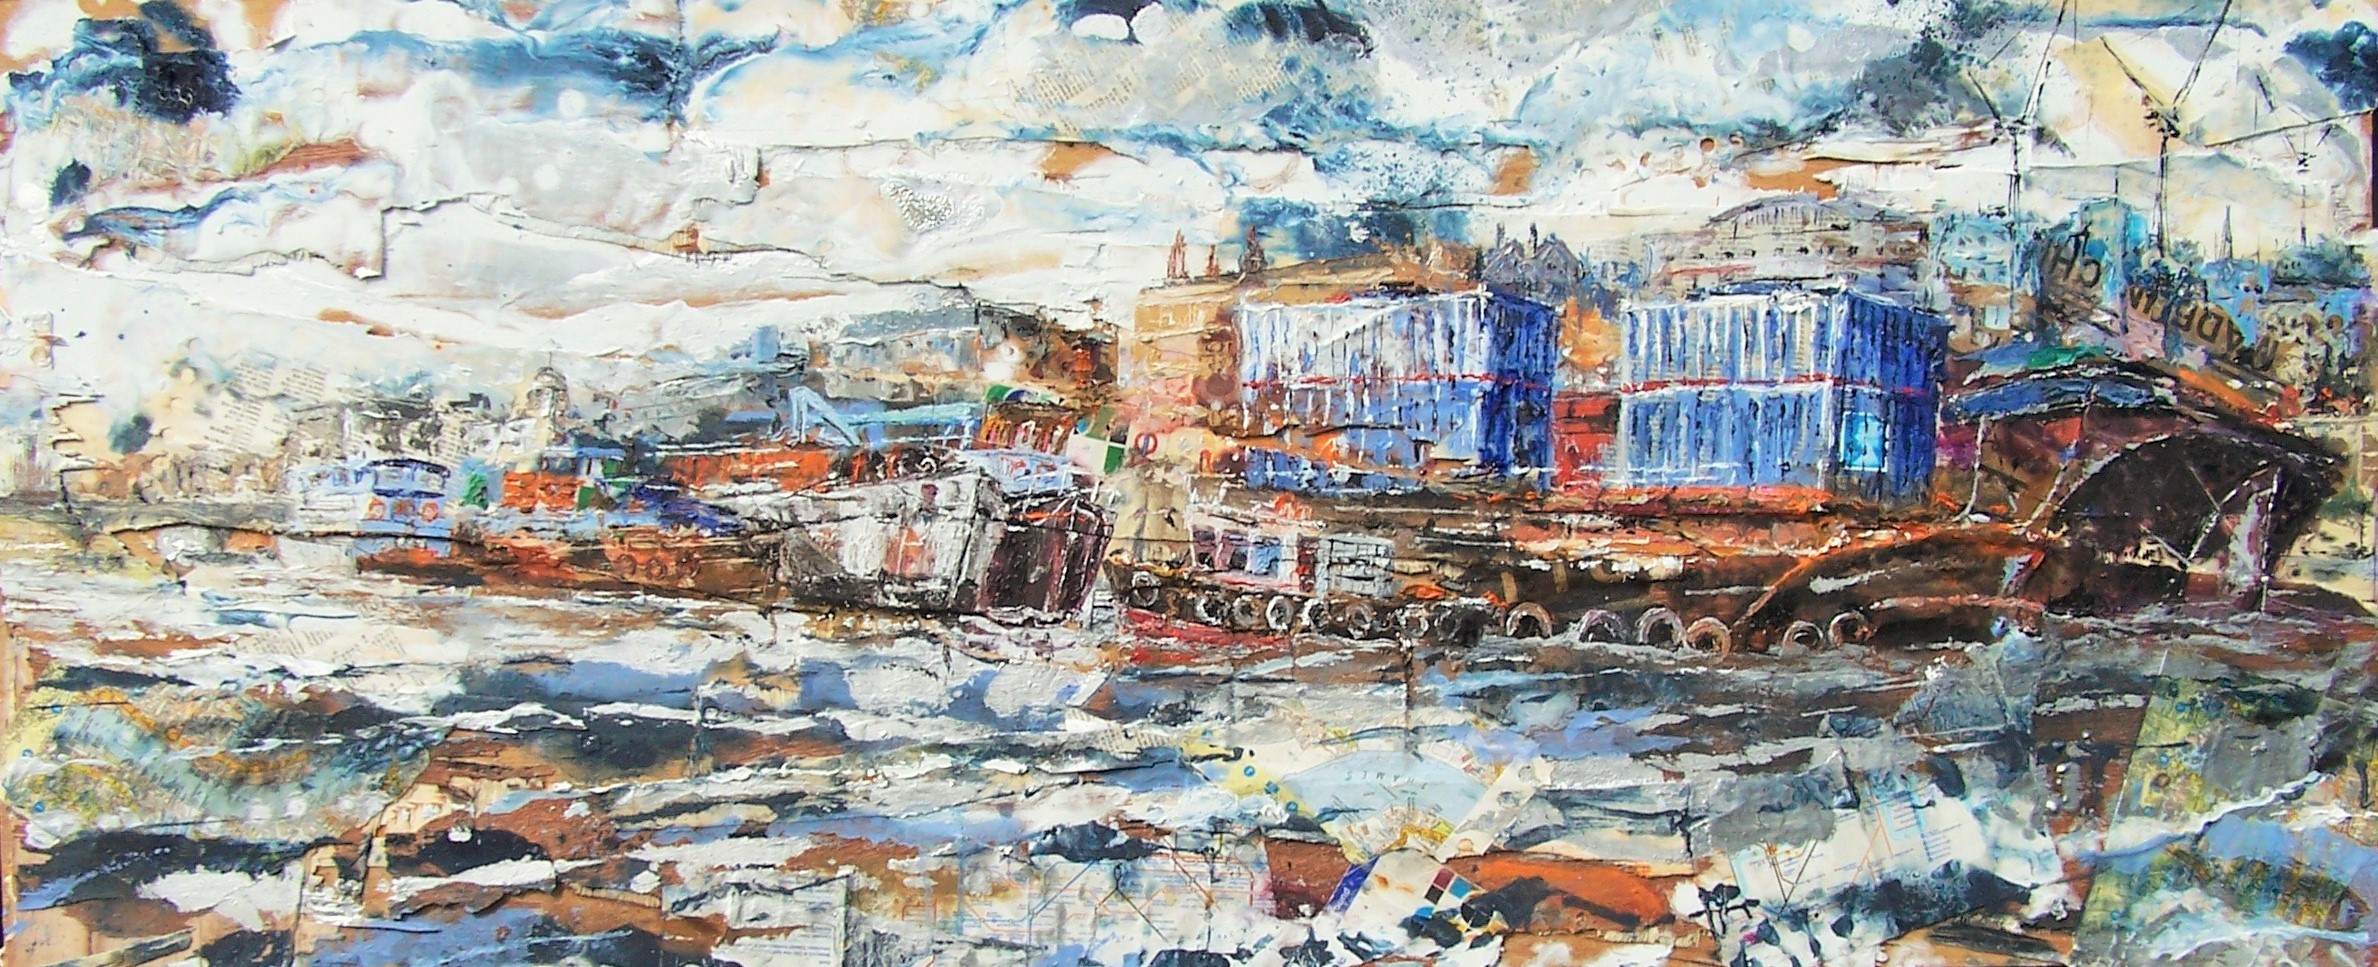 Thames Barges 2, Oil and collage on wood.